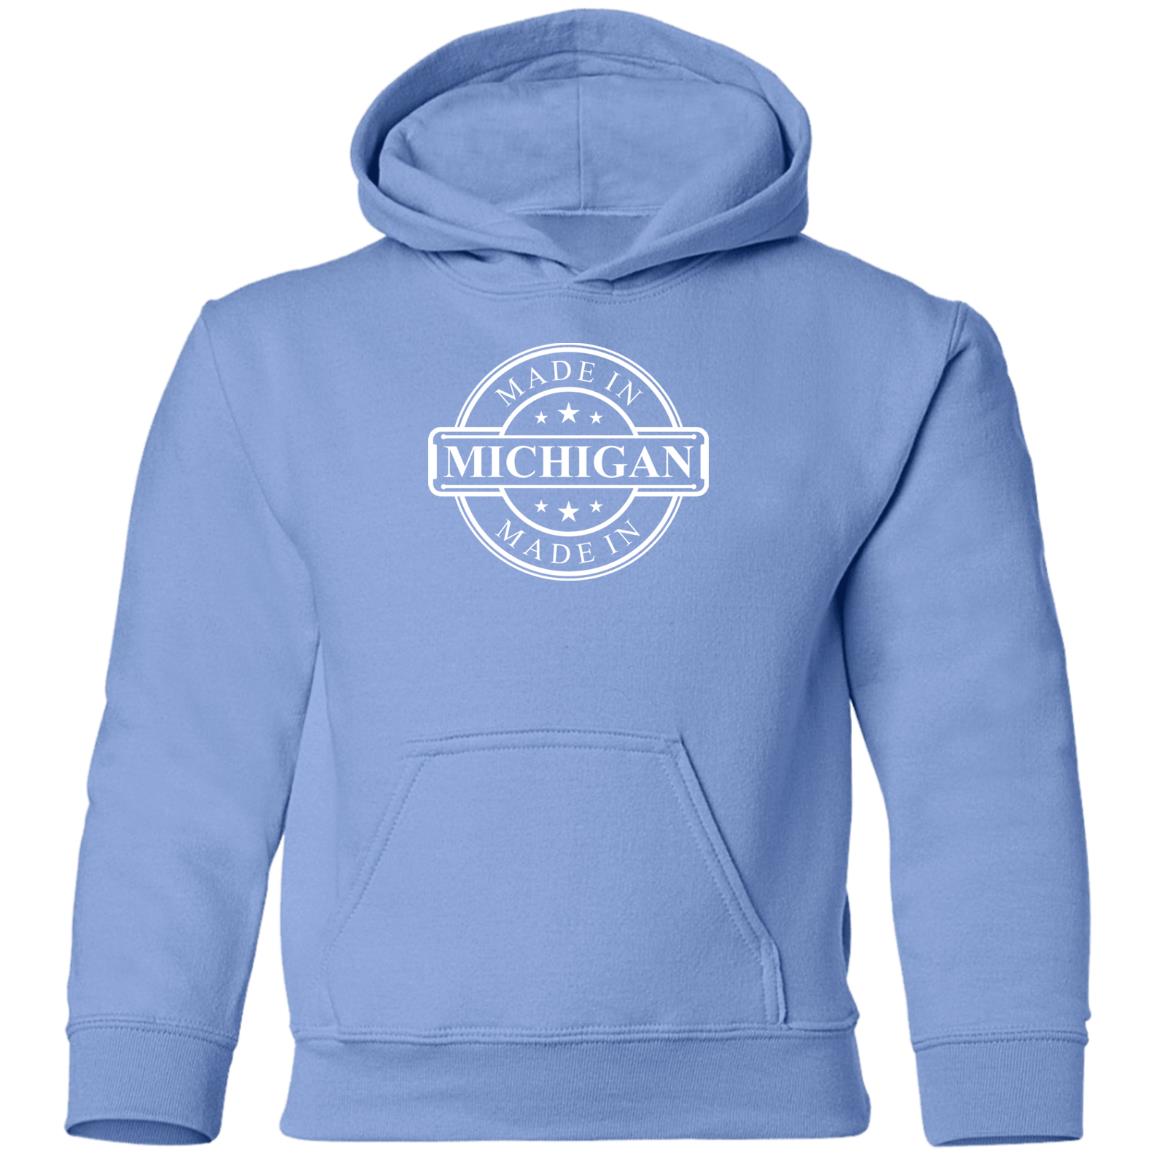 Made in Michigan - White G185B Youth Pullover Hoodie